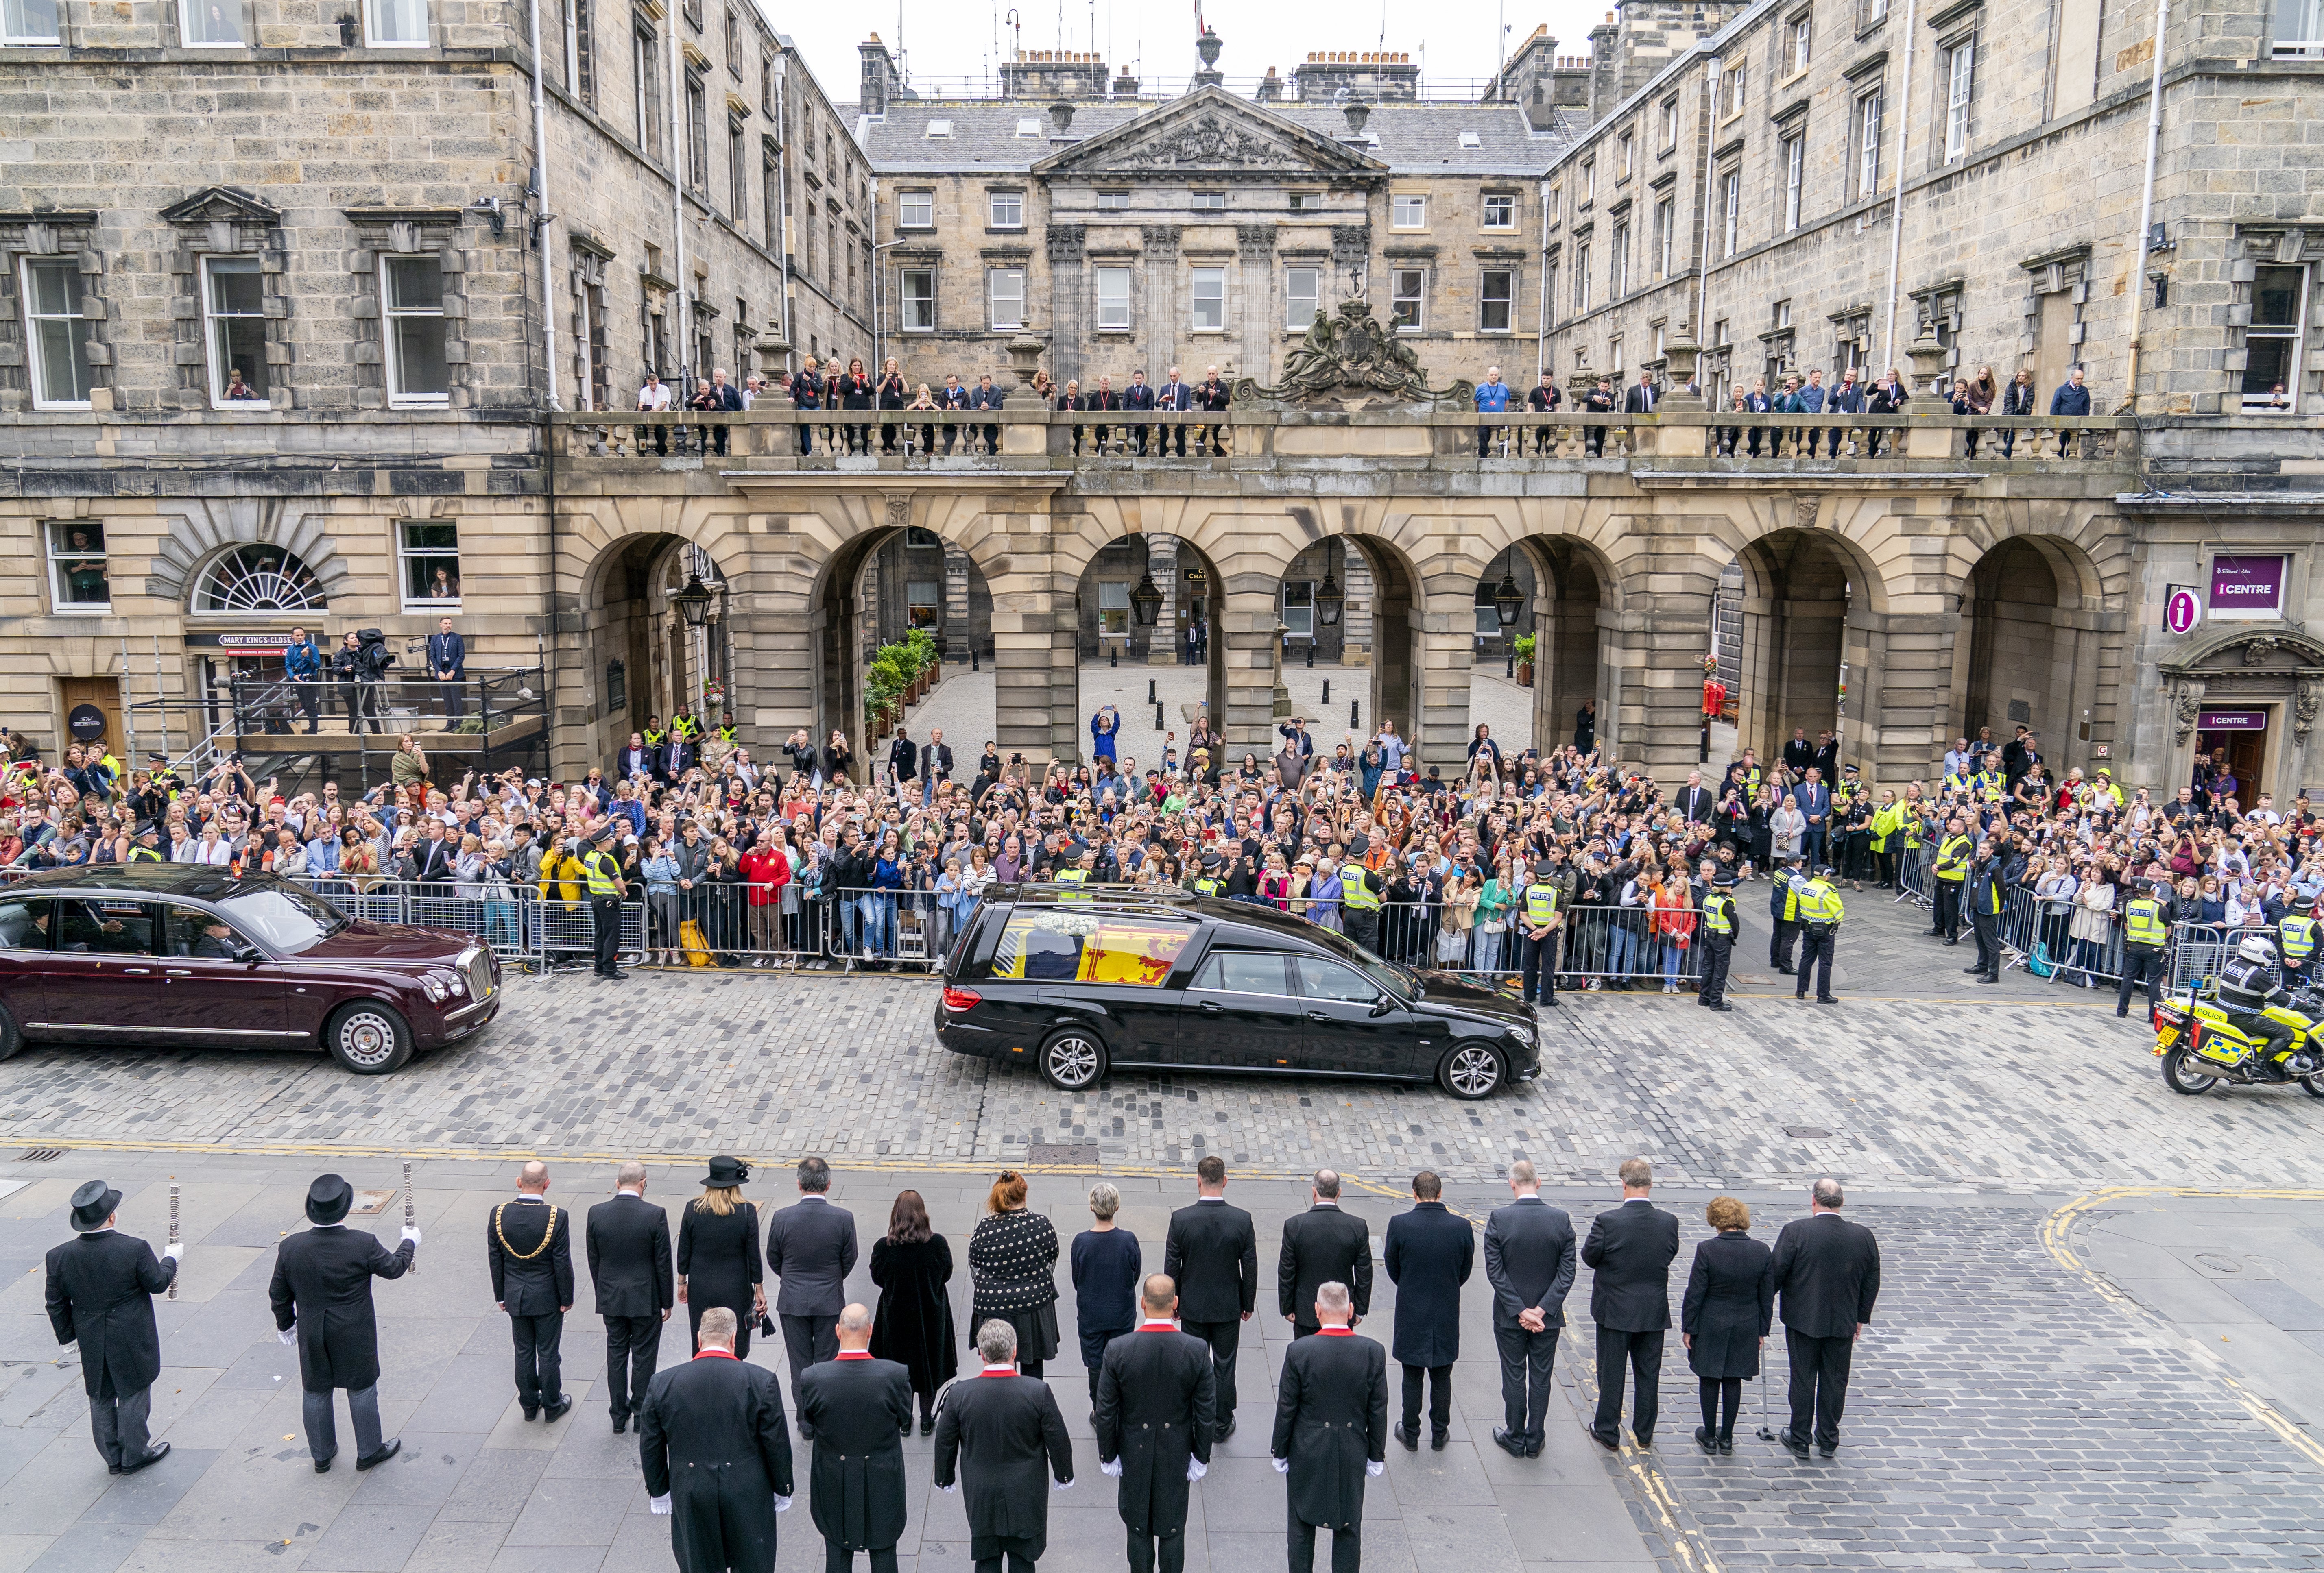 The hearse carrying the Queen’s coffin passes the City Chambers on the Royal Mile, Edinburgh, on the journey from Balmoral to the Palace of Holyroodhouse (Jane Barlow/PA)